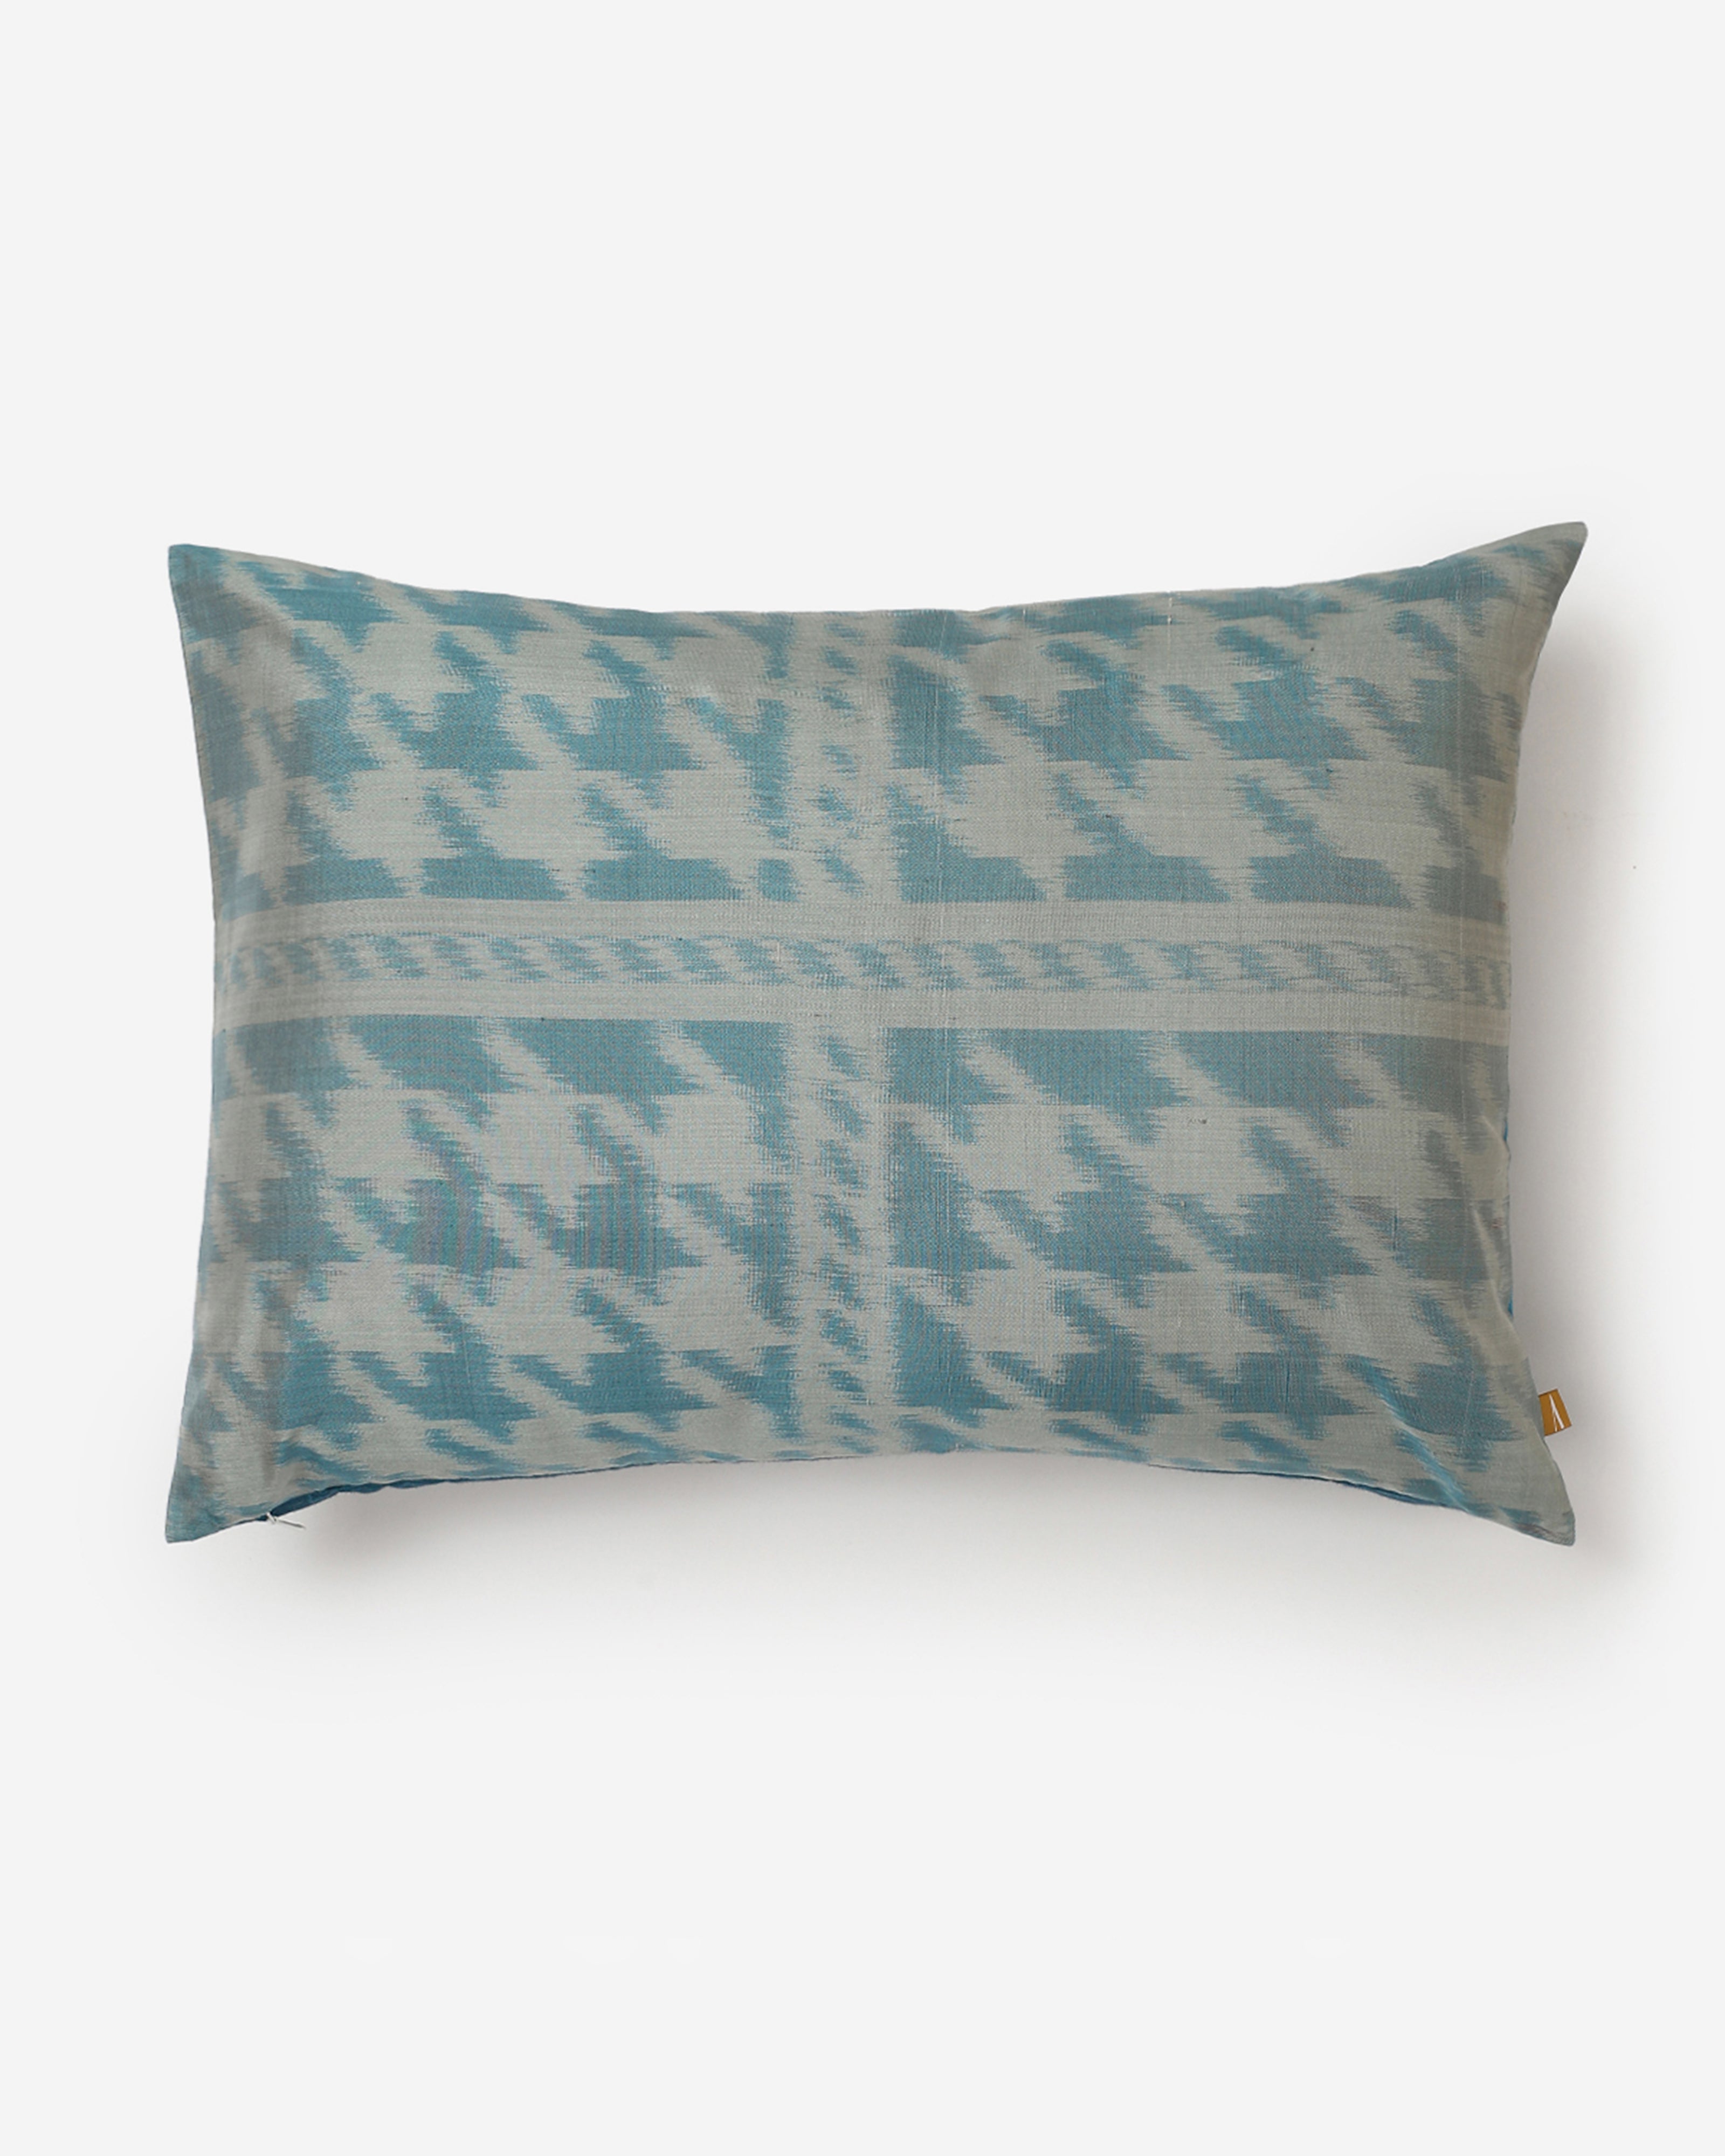 Hounds Tooth Weft Ikat Silk Cushion Cover